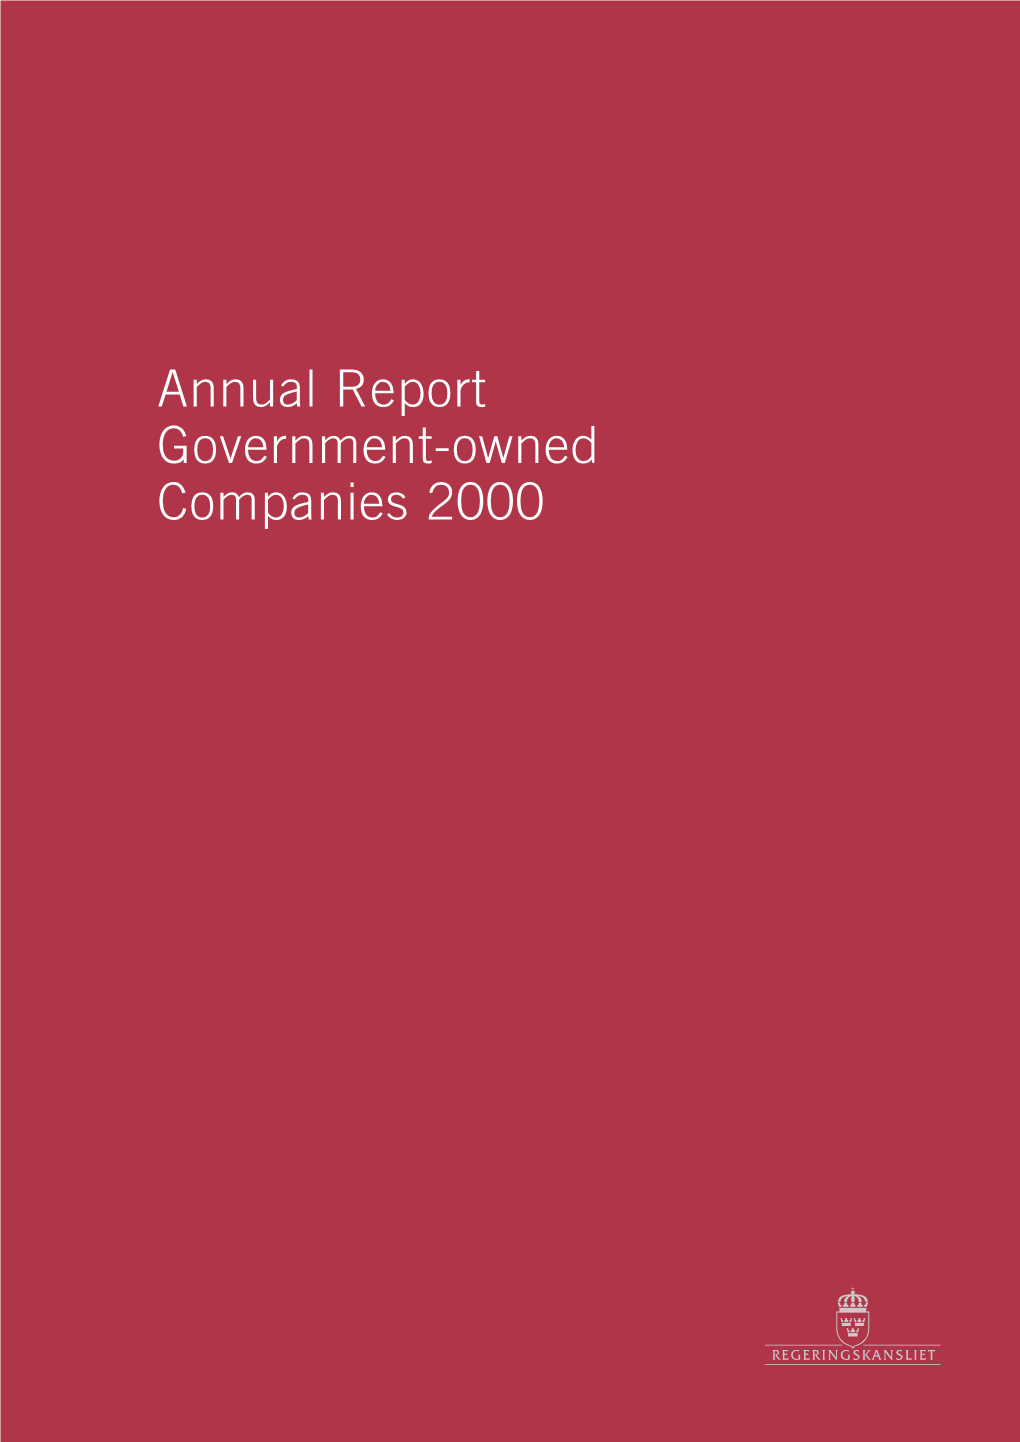 Annual Report Government-Owned Companies 2000 00 Omslag 427,6 X 297 ENG 01-07-04 08.53 Sidan 3 01 - 43 VB ENG 0628 01-07-04 08.24 Sidan 2